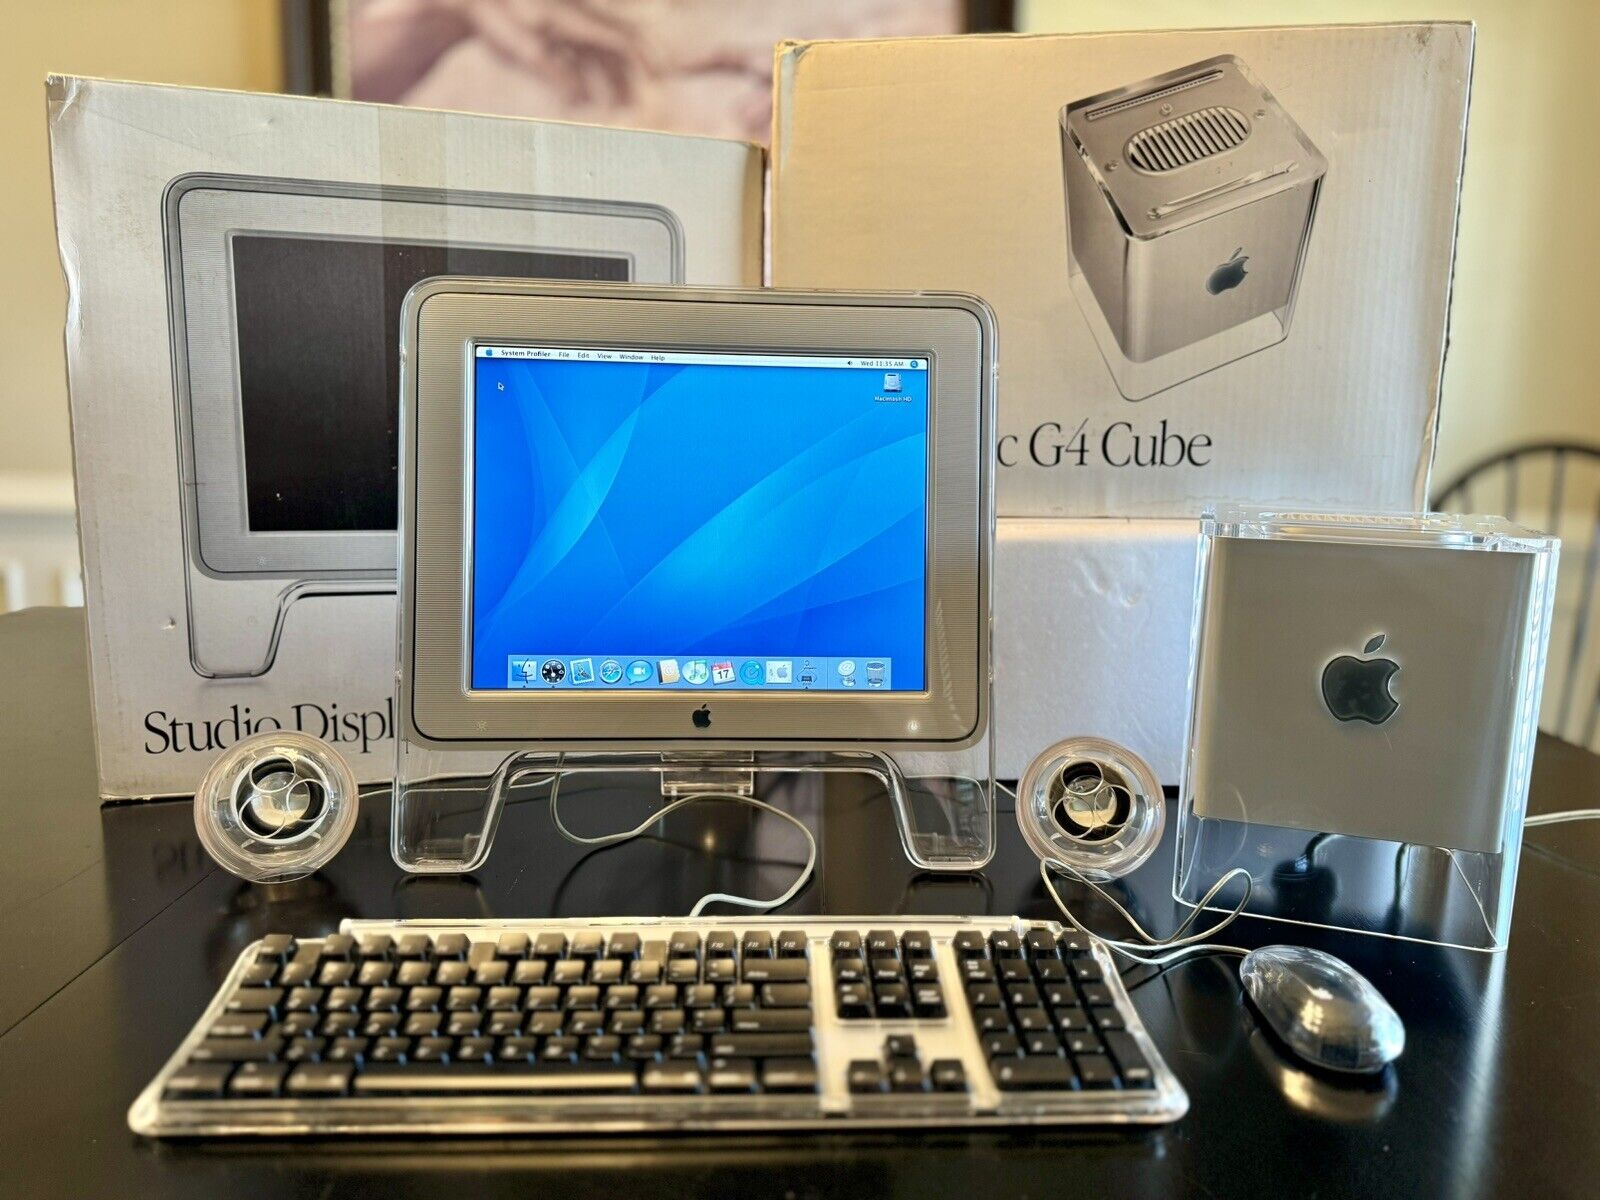 Apple G4 Cube Computer Bundle With Monitor and Original Boxes Fully Functional